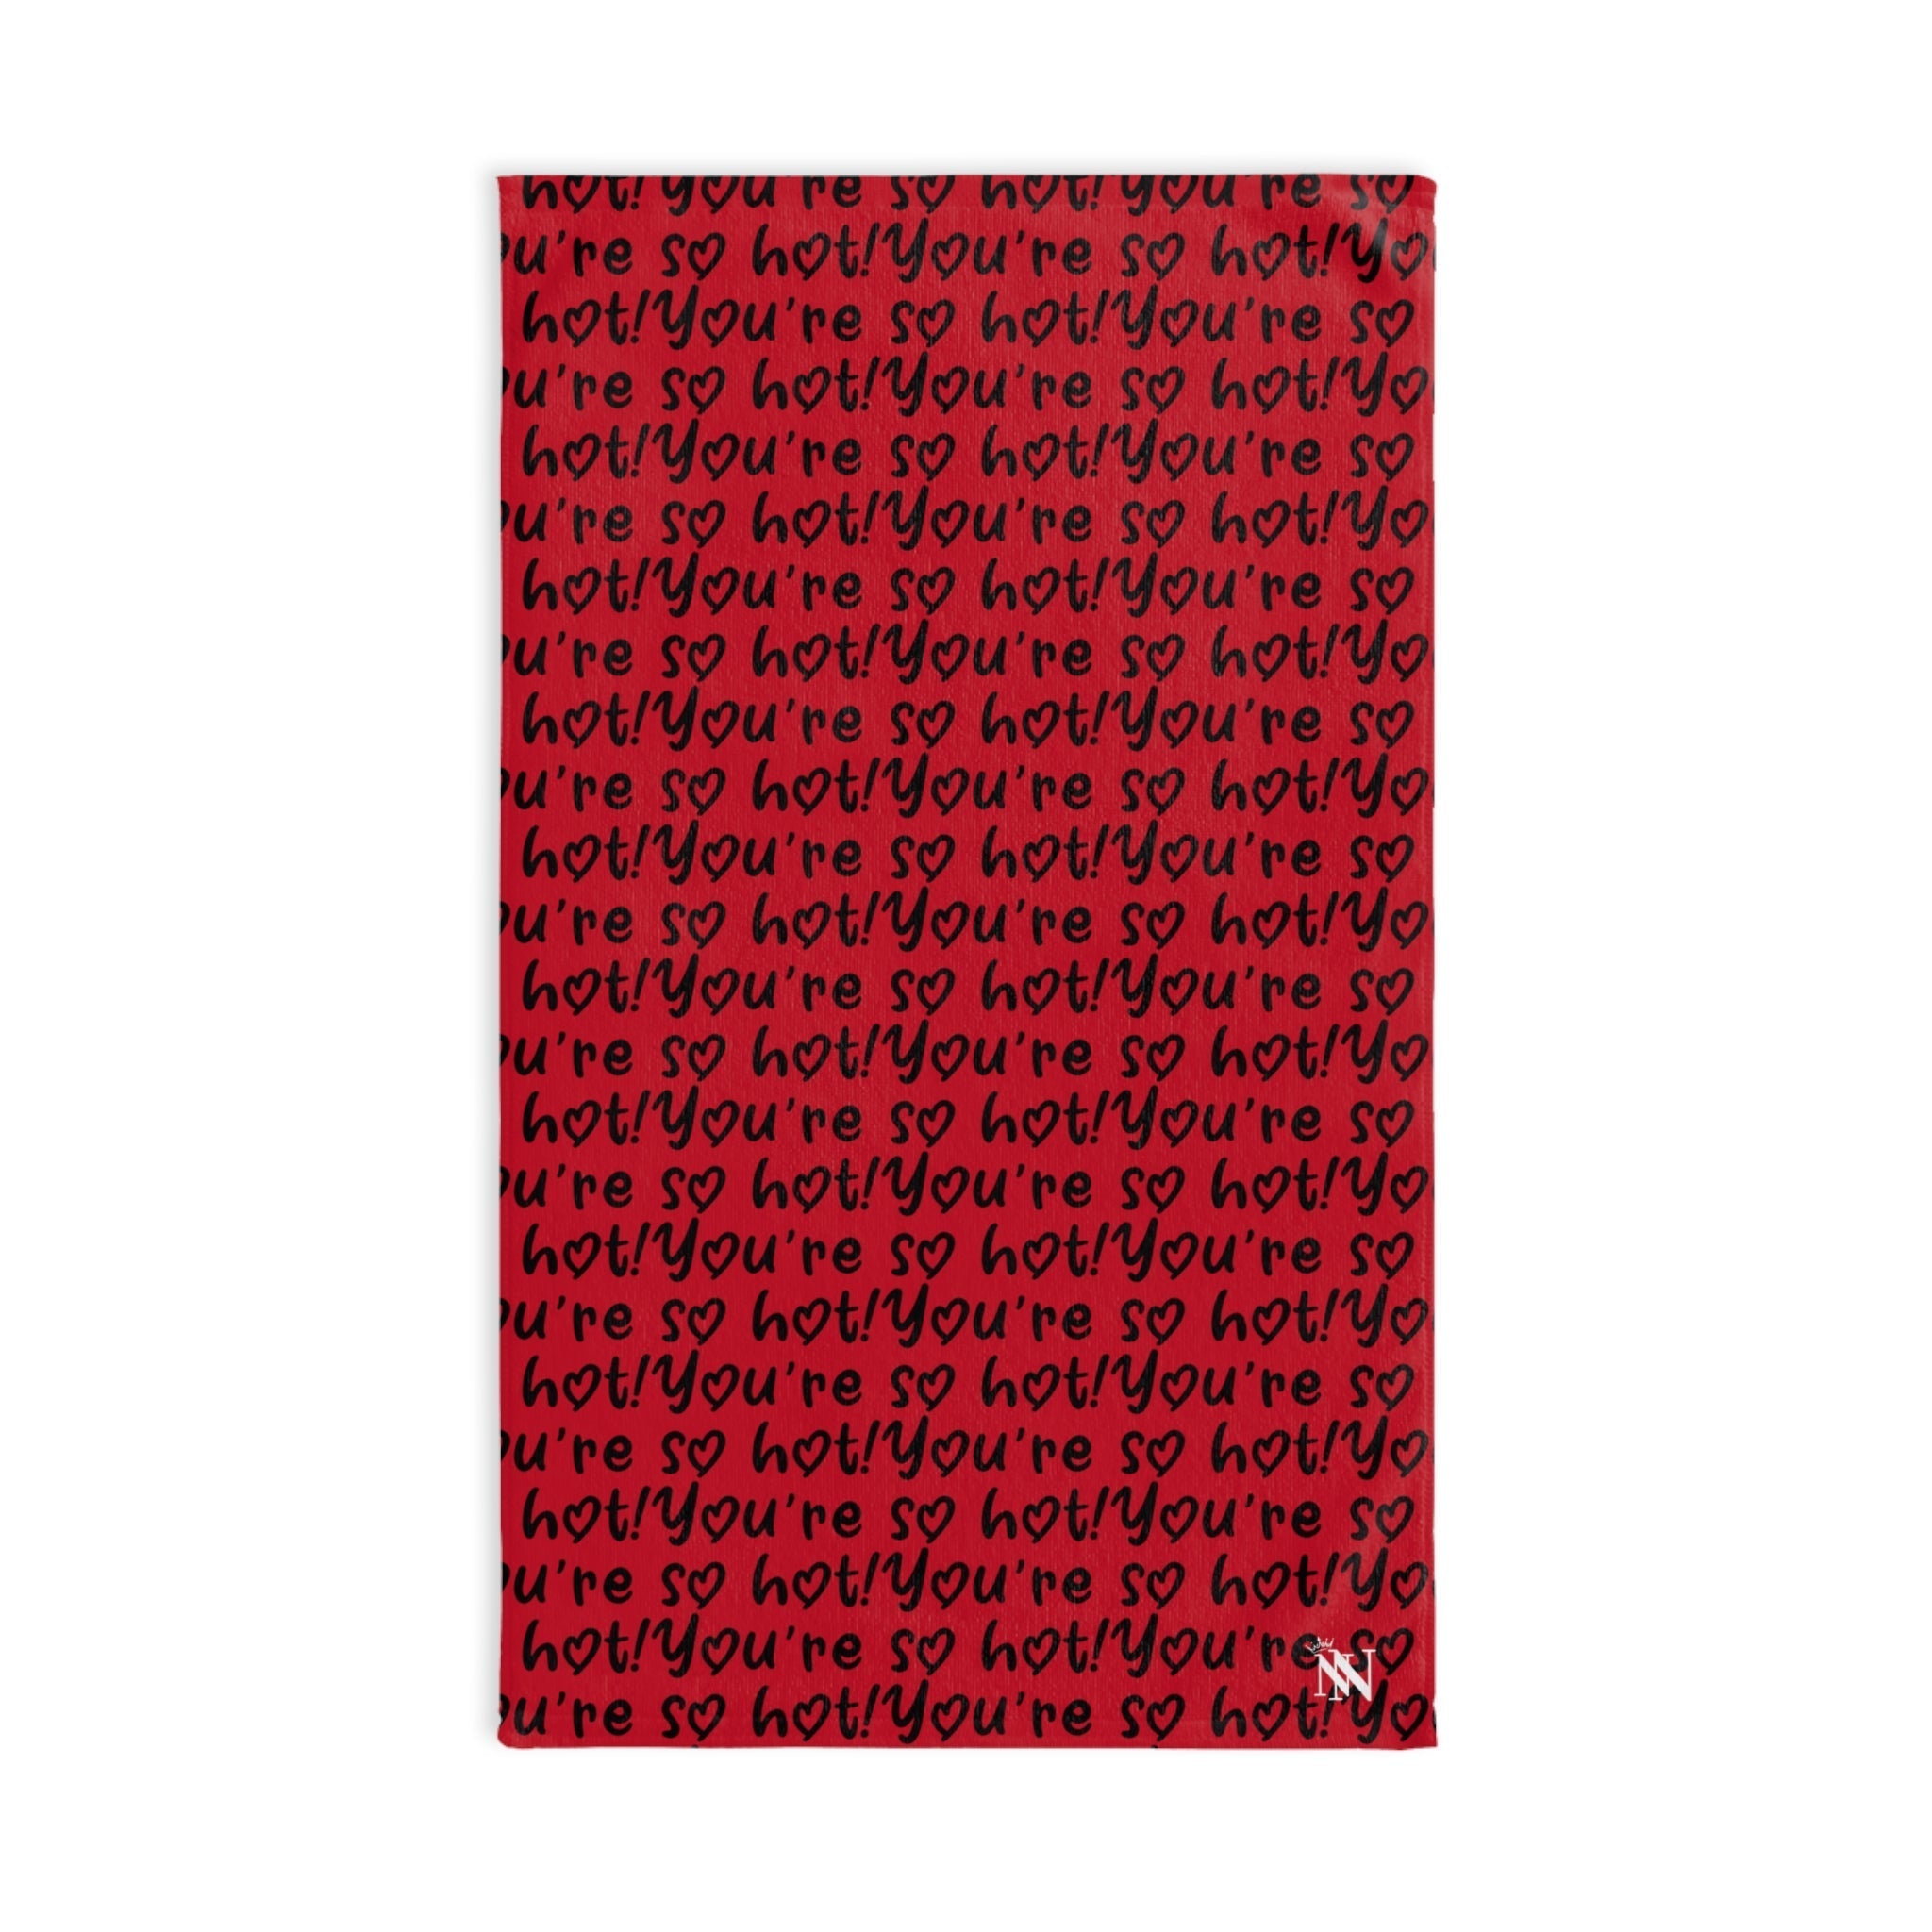 Hot Pattern You So Red | Sexy Gifts for Boyfriend, Funny Towel Romantic Gift for Wedding Couple Fiance First Year 2nd Anniversary Valentines, Party Gag Gifts, Joke Humor Cloth for Husband Men BF NECTAR NAPKINS